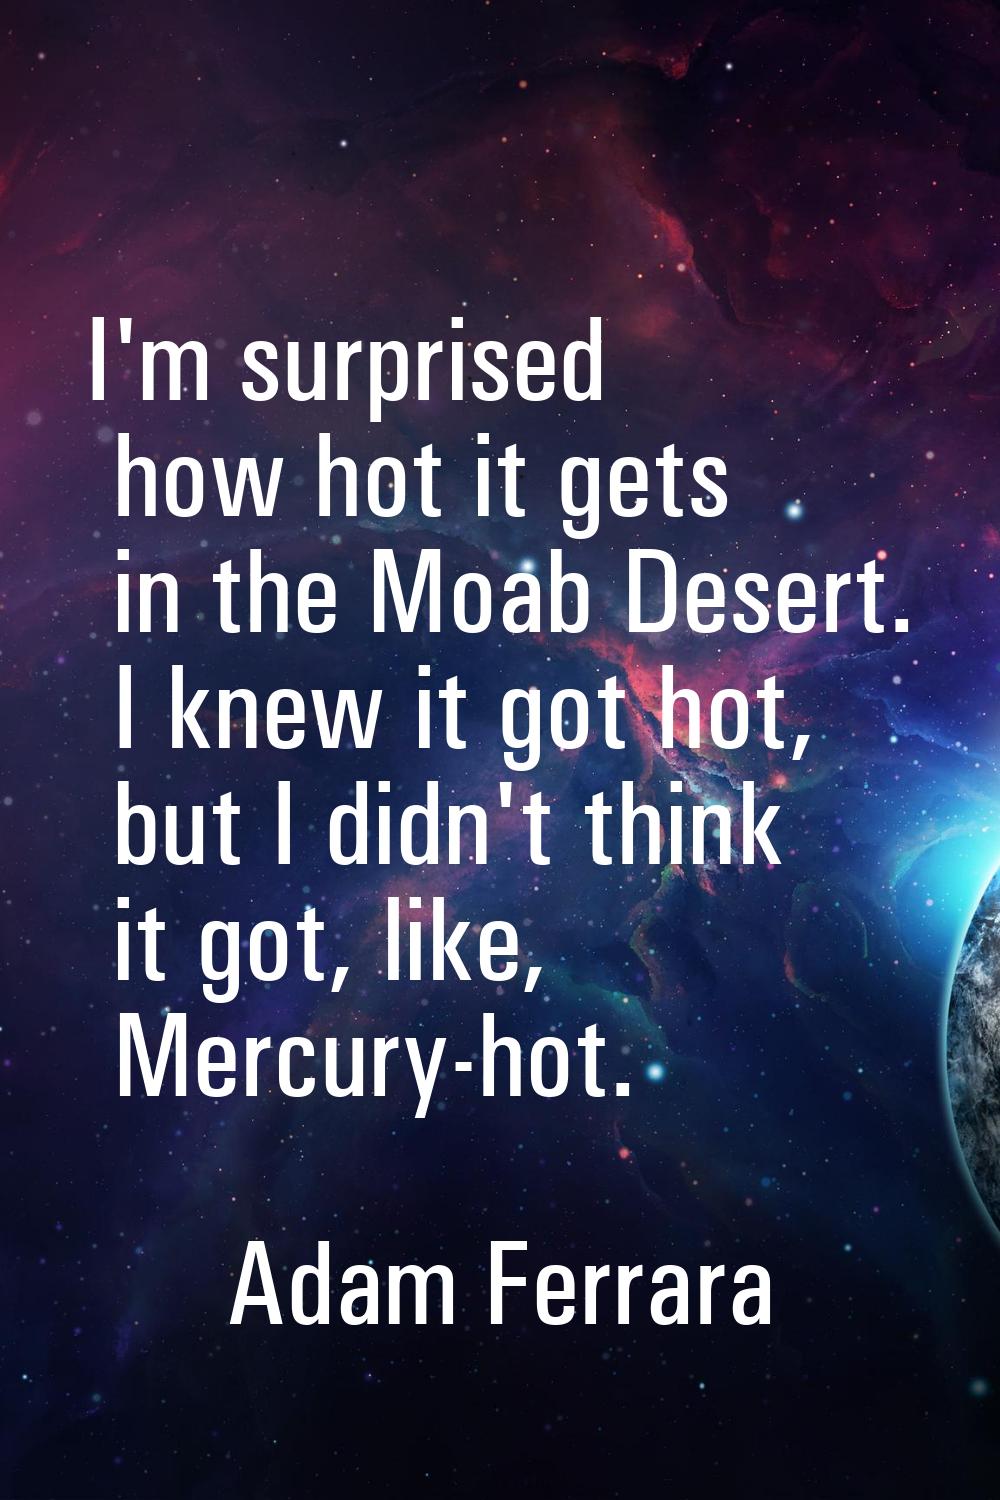 I'm surprised how hot it gets in the Moab Desert. I knew it got hot, but I didn't think it got, lik